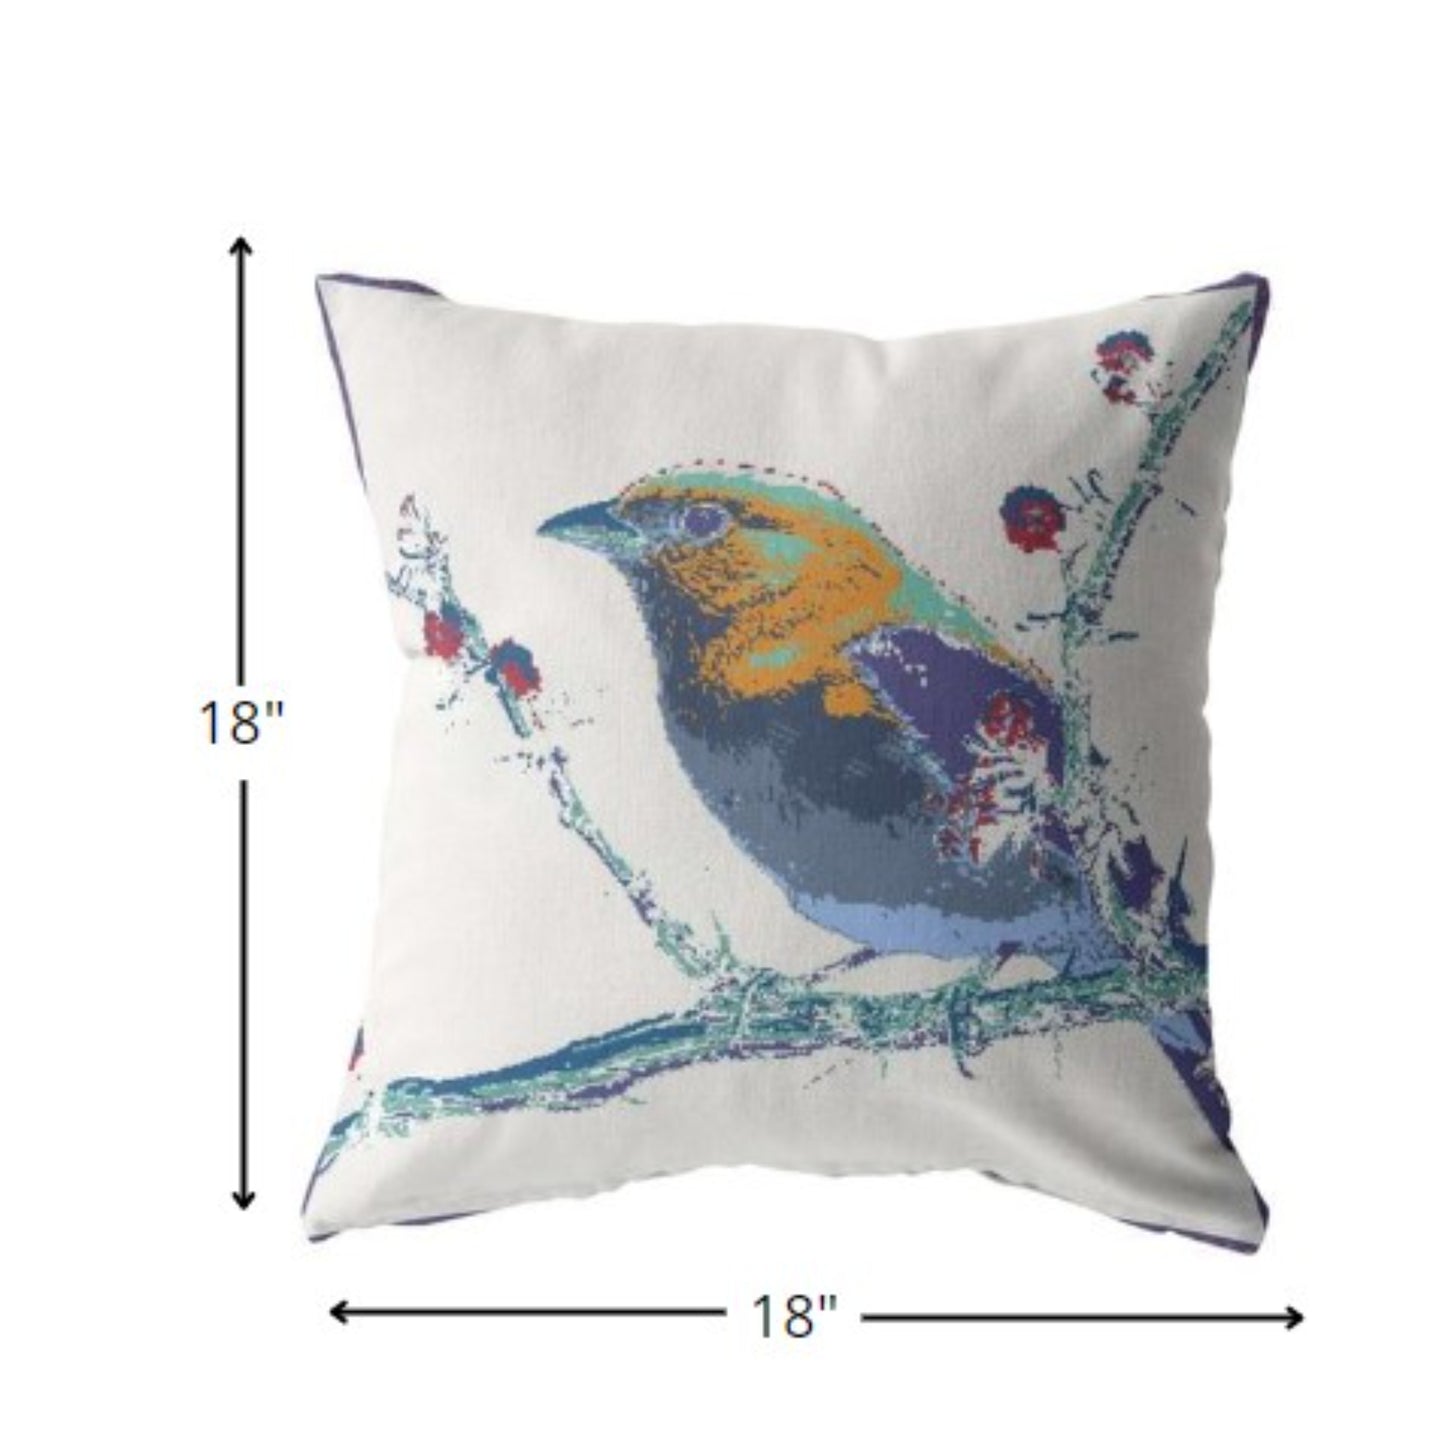 18” Blue White Robin Zippered Suede Throw Pillow